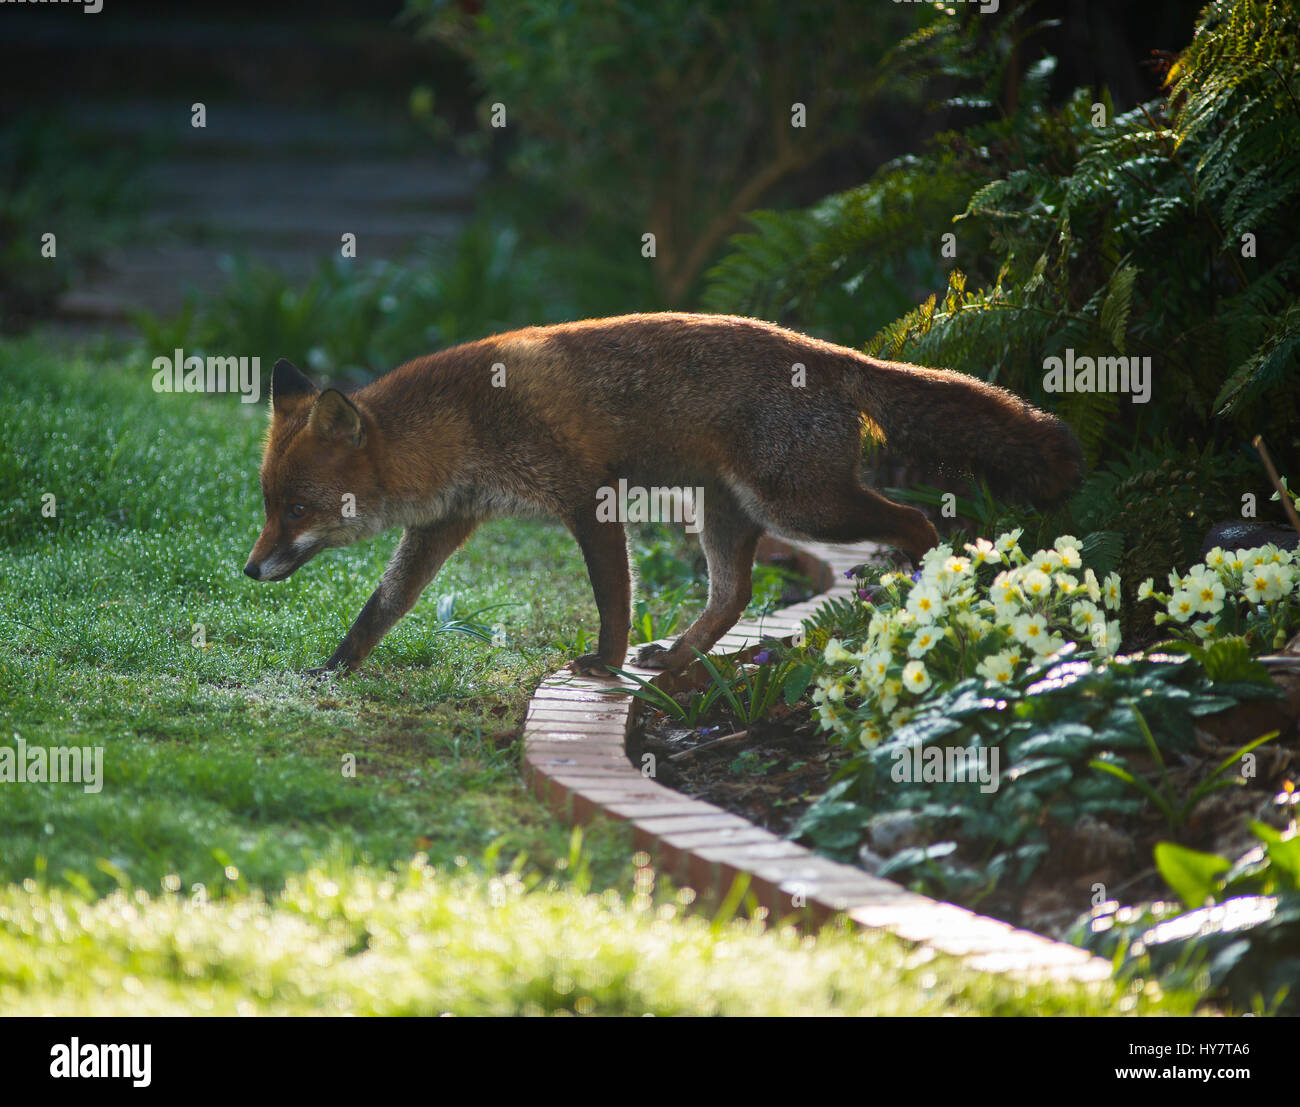 Wimbledon, London, UK. 2nd April, 2017. Red fox searches for food on a dew covered lawn in London, backlit in strong spring sunlight. Credit: Malcolm Park/Alamy Live News. Stock Photo